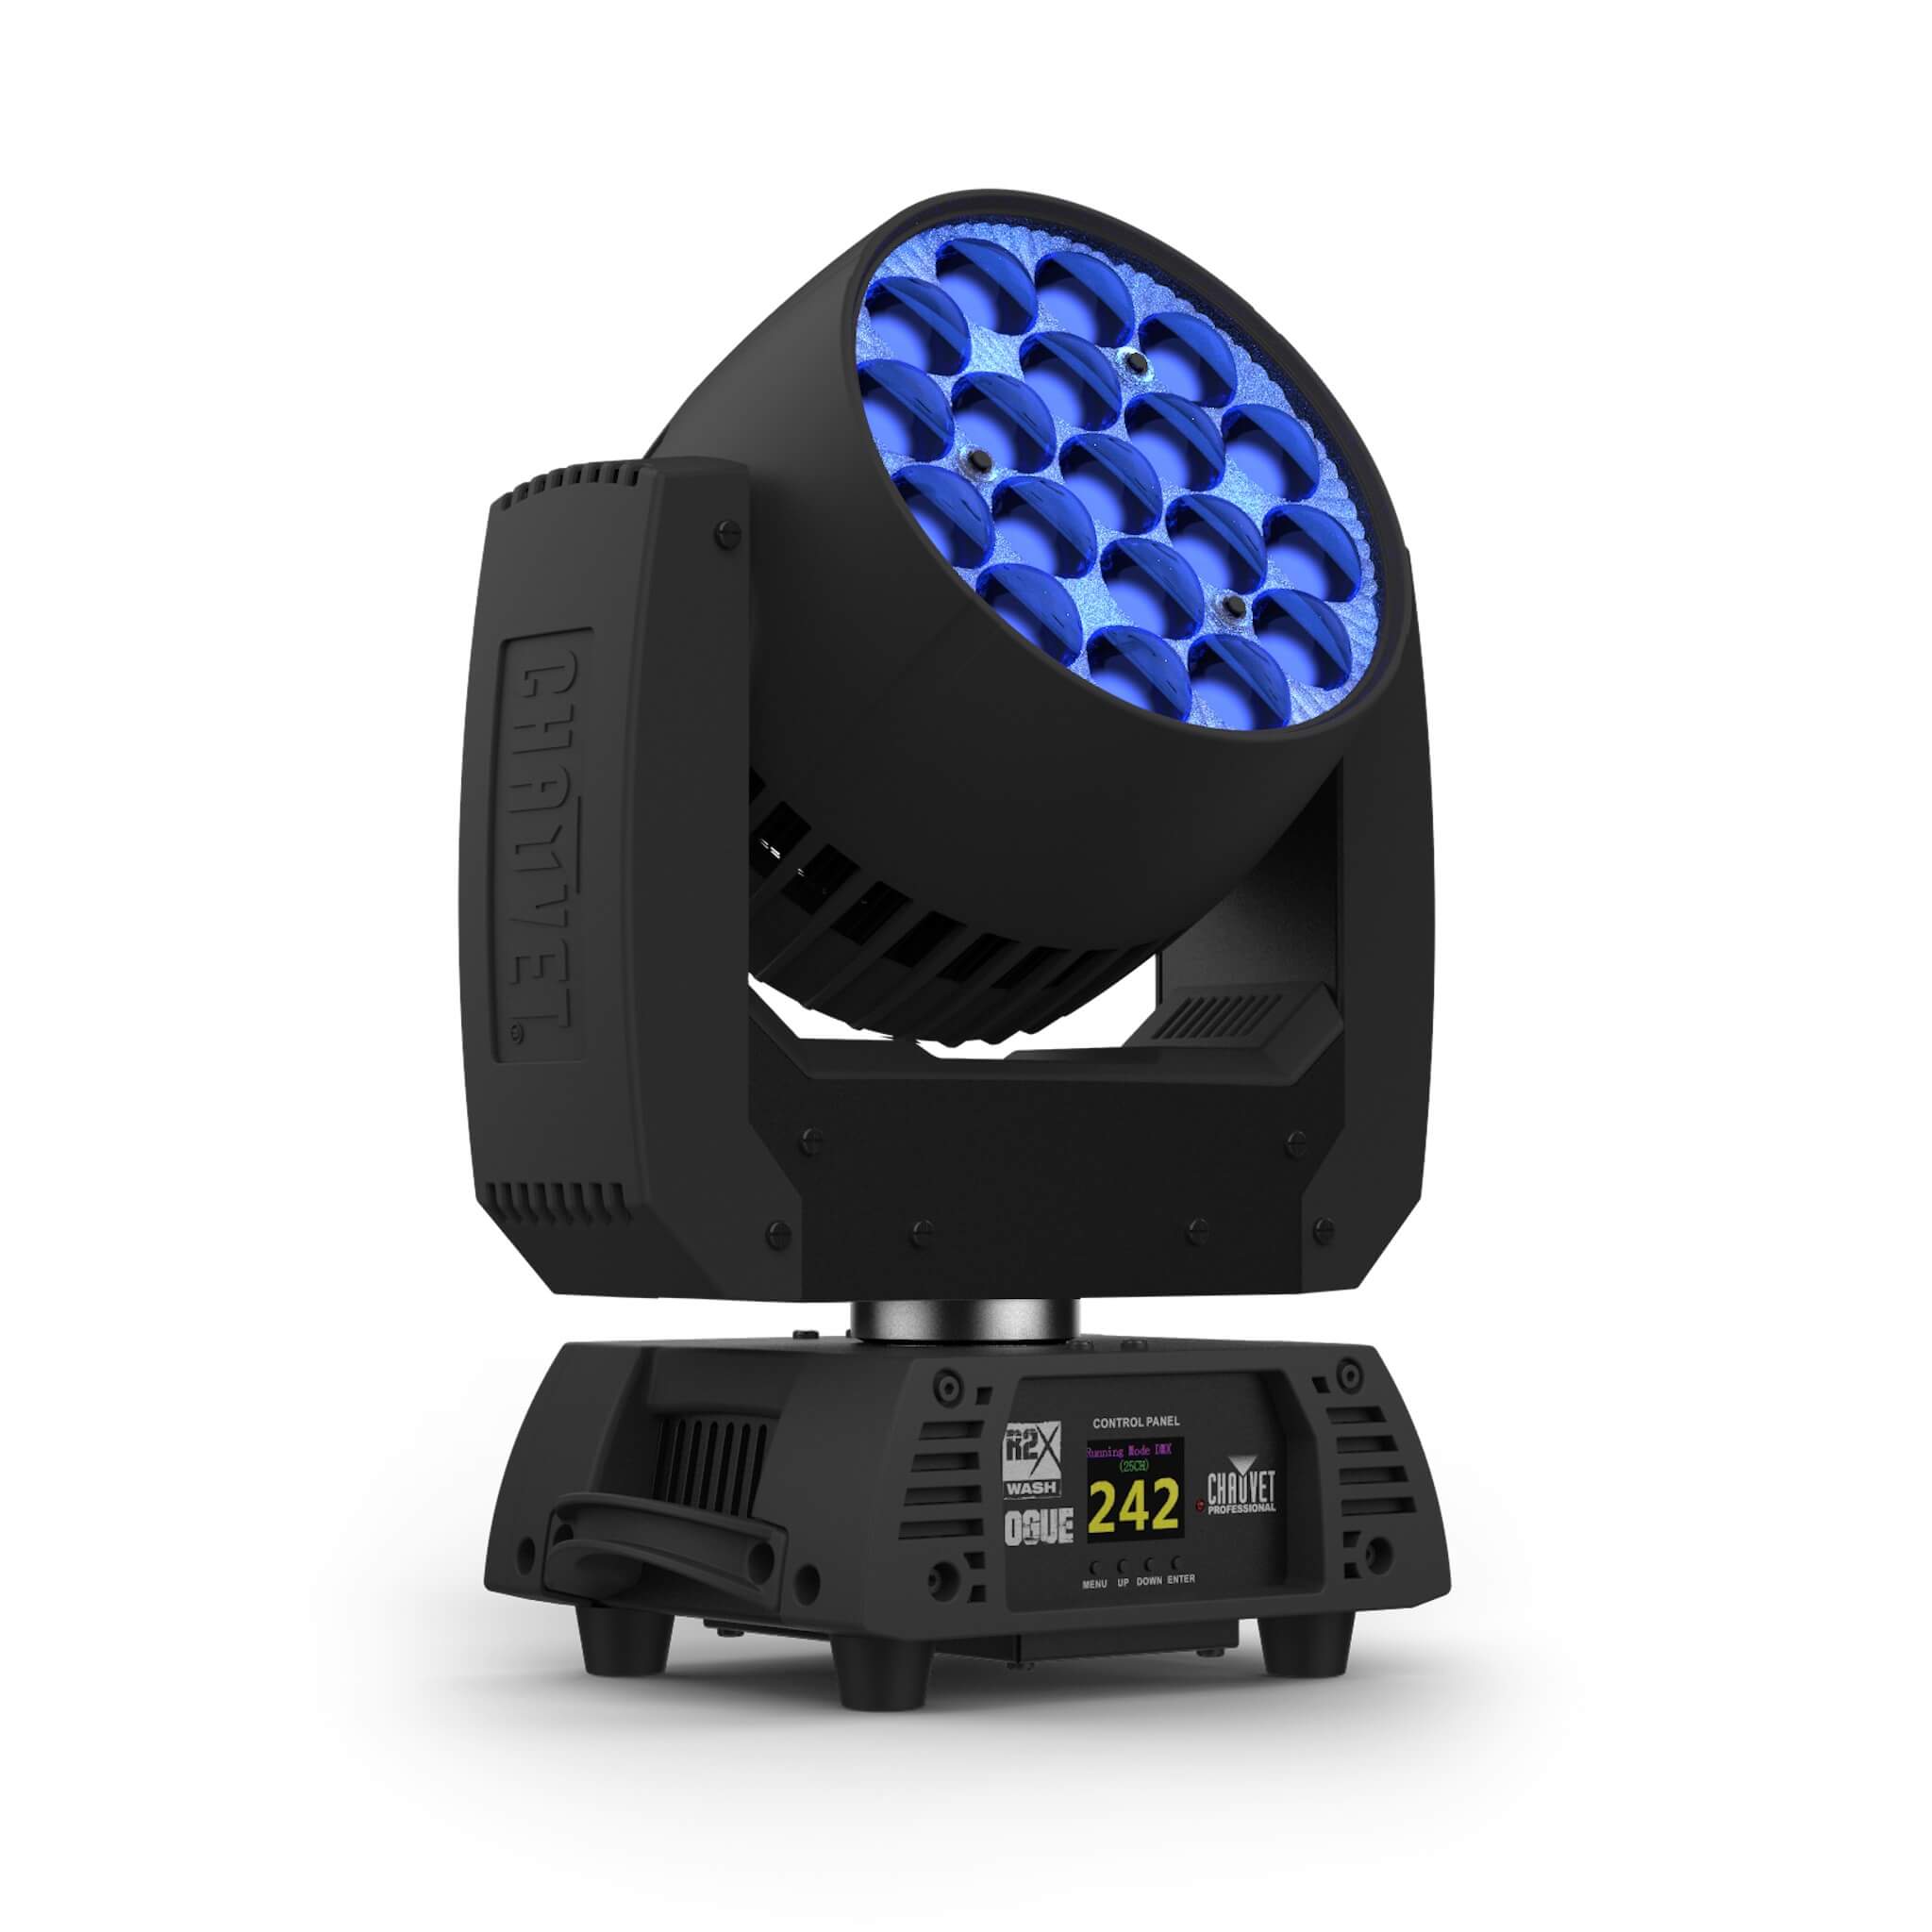 Chauvet Professional Rogue R2X Wash - LED Moving Head Light, right